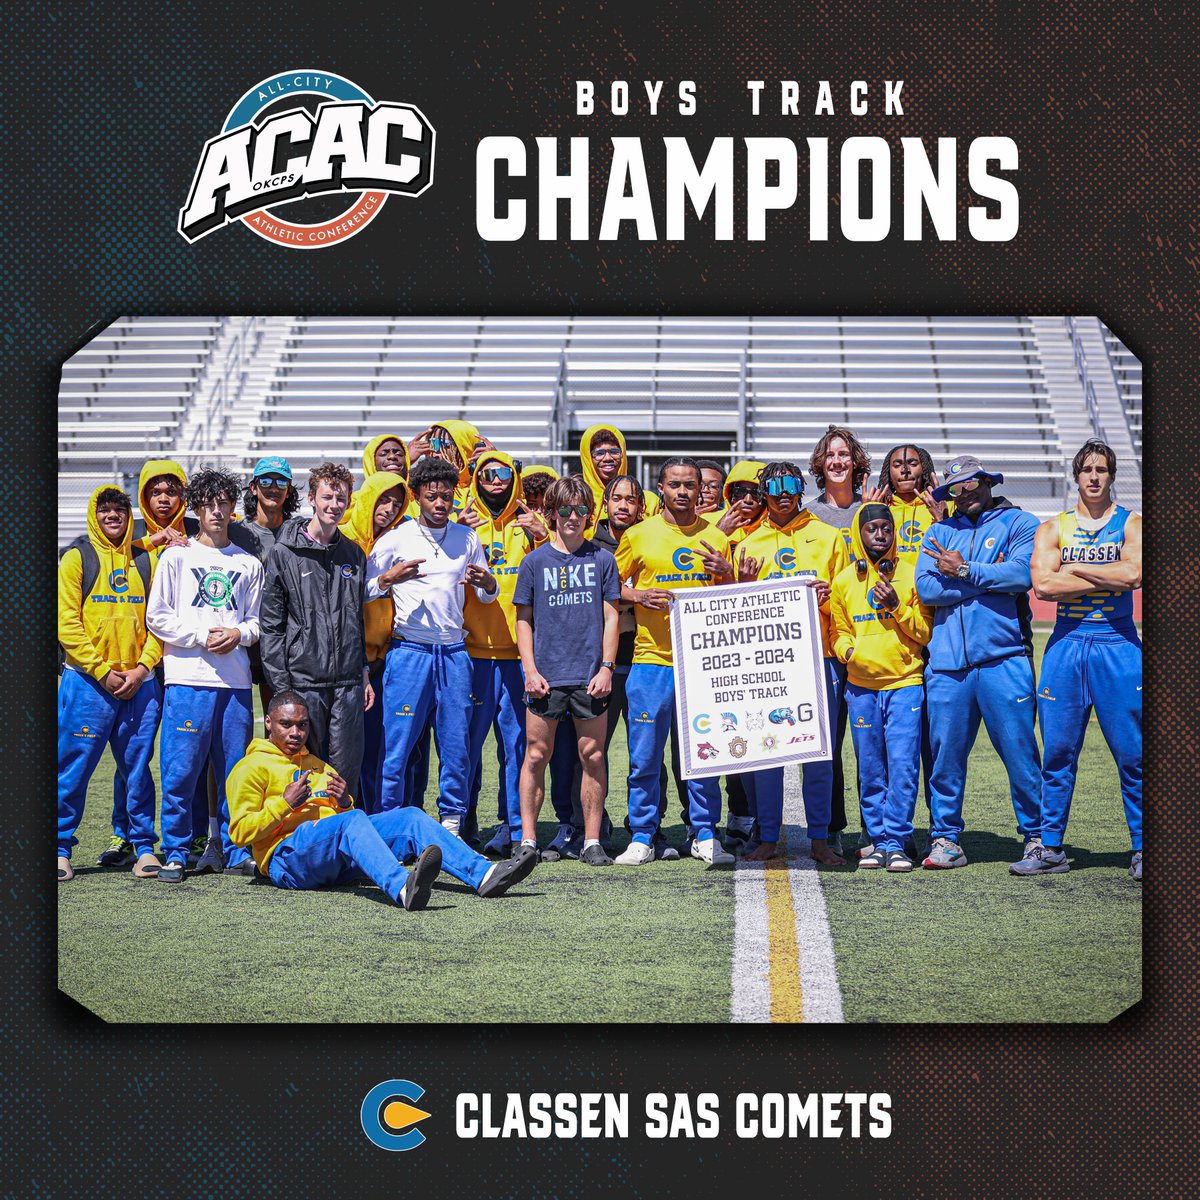 𝗔𝗖𝗔𝗖 𝗧𝗿𝗮𝗰𝗸 𝗖𝗵𝗮𝗺𝗽𝘀 👟 Congratulations to the 2024 ACAC Track & Field Girls and Boys Champions crowned on Wednesday afternoon! Girls 🏆 @DHSAthleticsOKC Boys 🏆 @ClassenComets